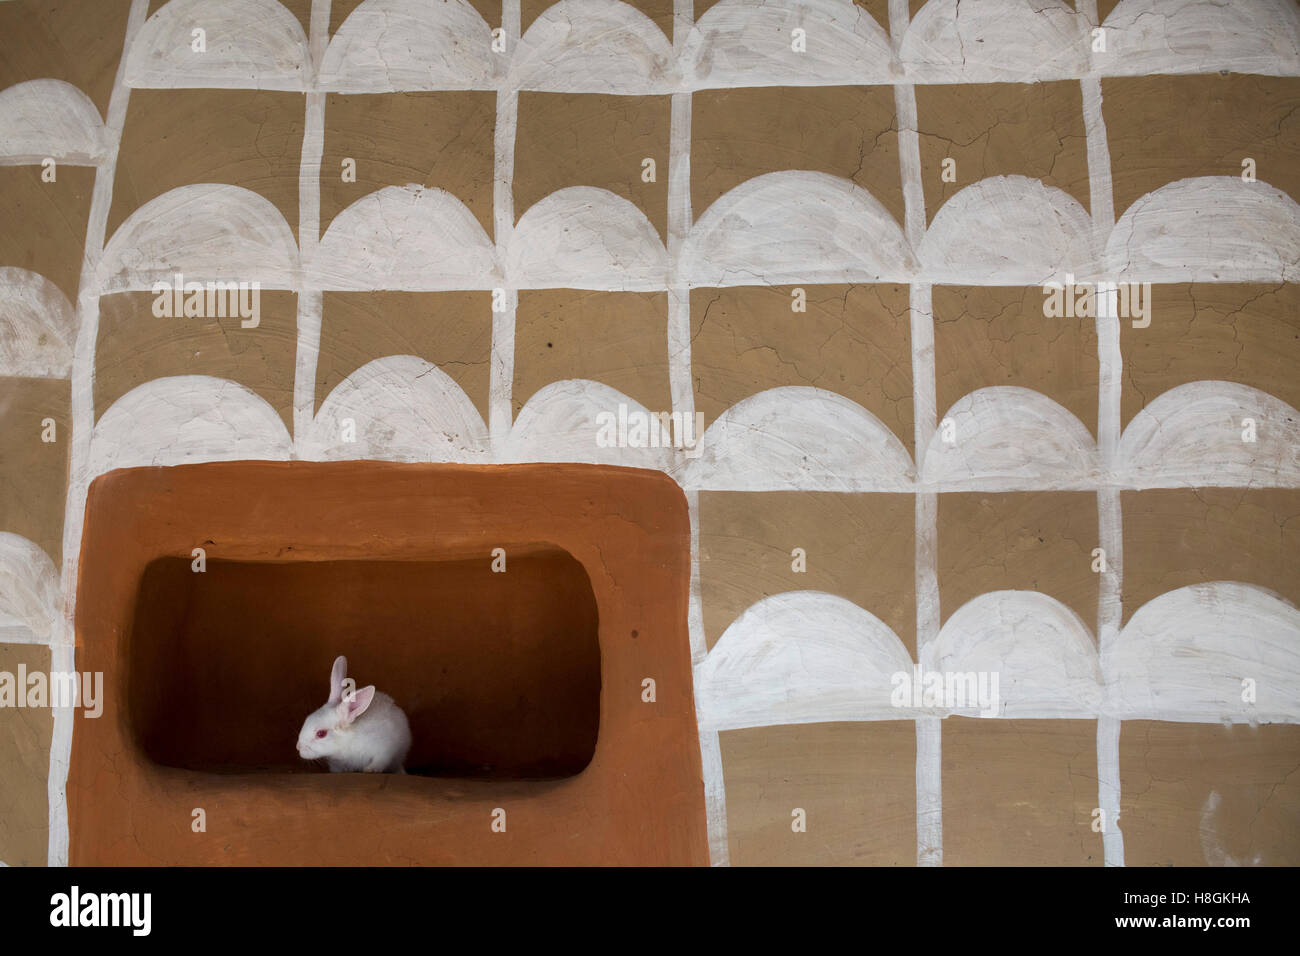 North Bengal, Bangladesh. 11th November, 2016. A rabbit inside a house at a rural village in North Bengal in Bangladesh, on November 10, 2016. lifestyle and view of houses of a rural village in Bangladesh. These houses are made by mud and  the walls are beautifully painted using natural colours and the interiors.Santal tribe and hindu people are living these houses.The village paintings are considered auspicious symbols related to fertility and fecundity being painted on the walls. Credit:  zakir hossain chowdhury zakir/Alamy Live News Stock Photo